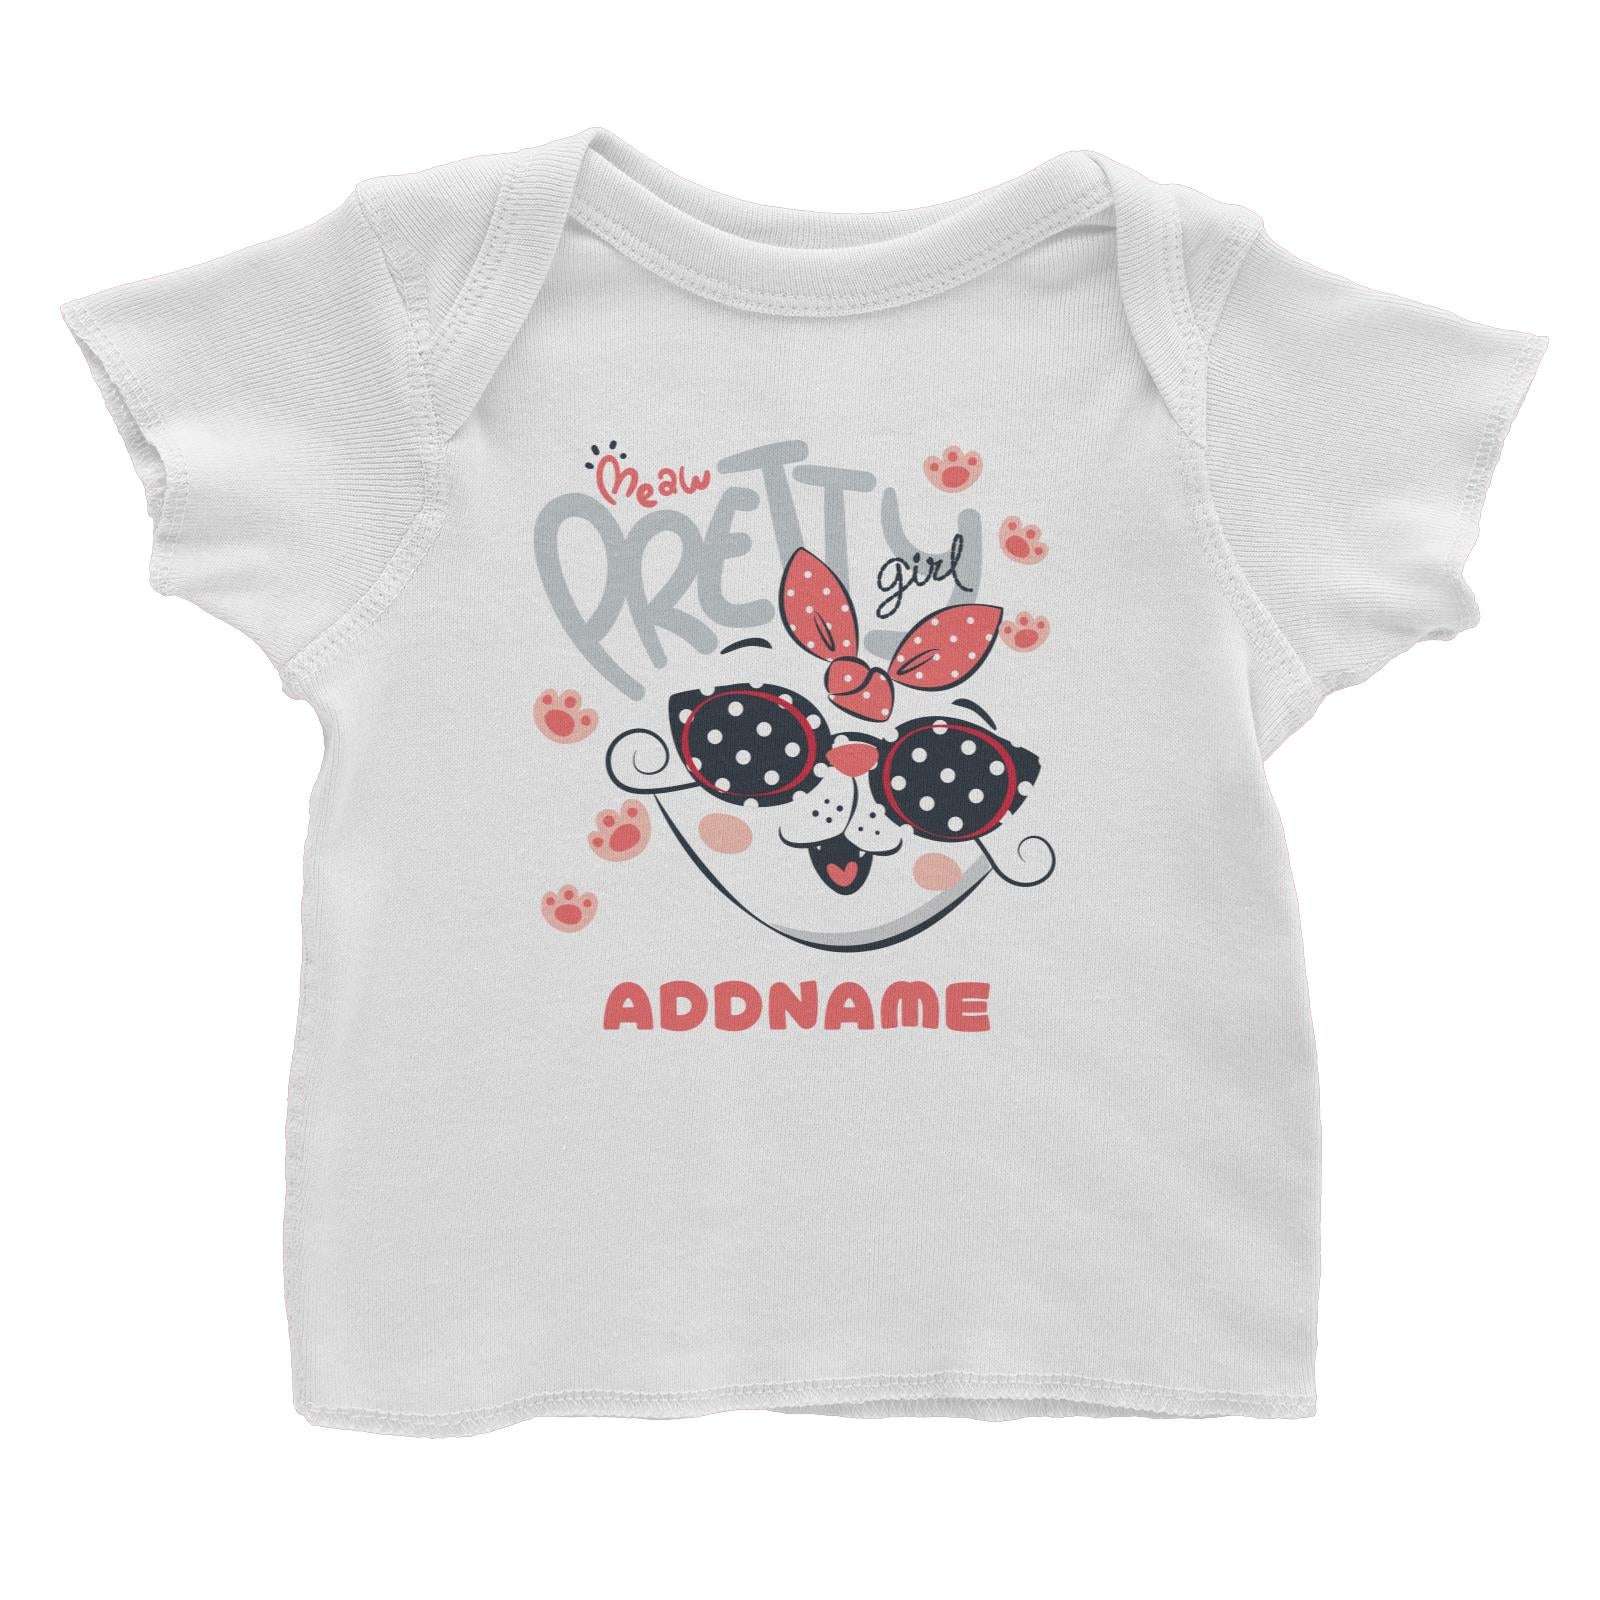 Meaw Pretty Girl Cat Addname Baby T-Shirt